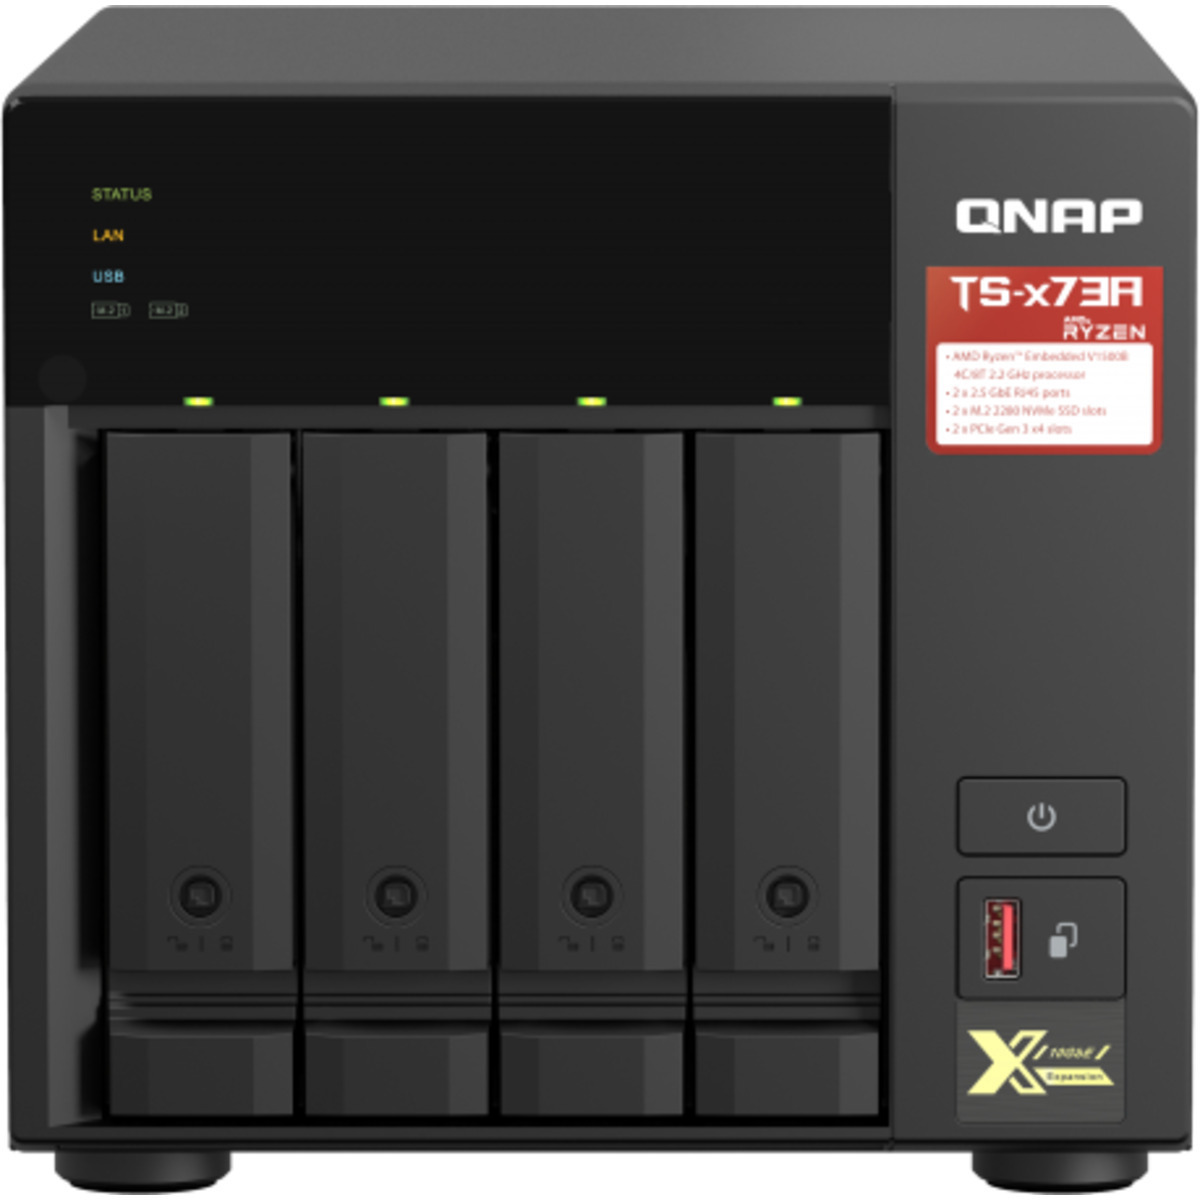 buy QNAP TS-473A 80tb Desktop NAS - Network Attached Storage Device 4x20000gb Seagate IronWolf Pro ST20000NT001 3.5 7200rpm SATA 6Gb/s HDD NAS Class Drives Installed - Burn-In Tested - ON SALE - nas headquarters buy network attached storage server device das new raid-5 free shipping simply usa christmas holiday black friday cyber monday week sale happening now! TS-473A